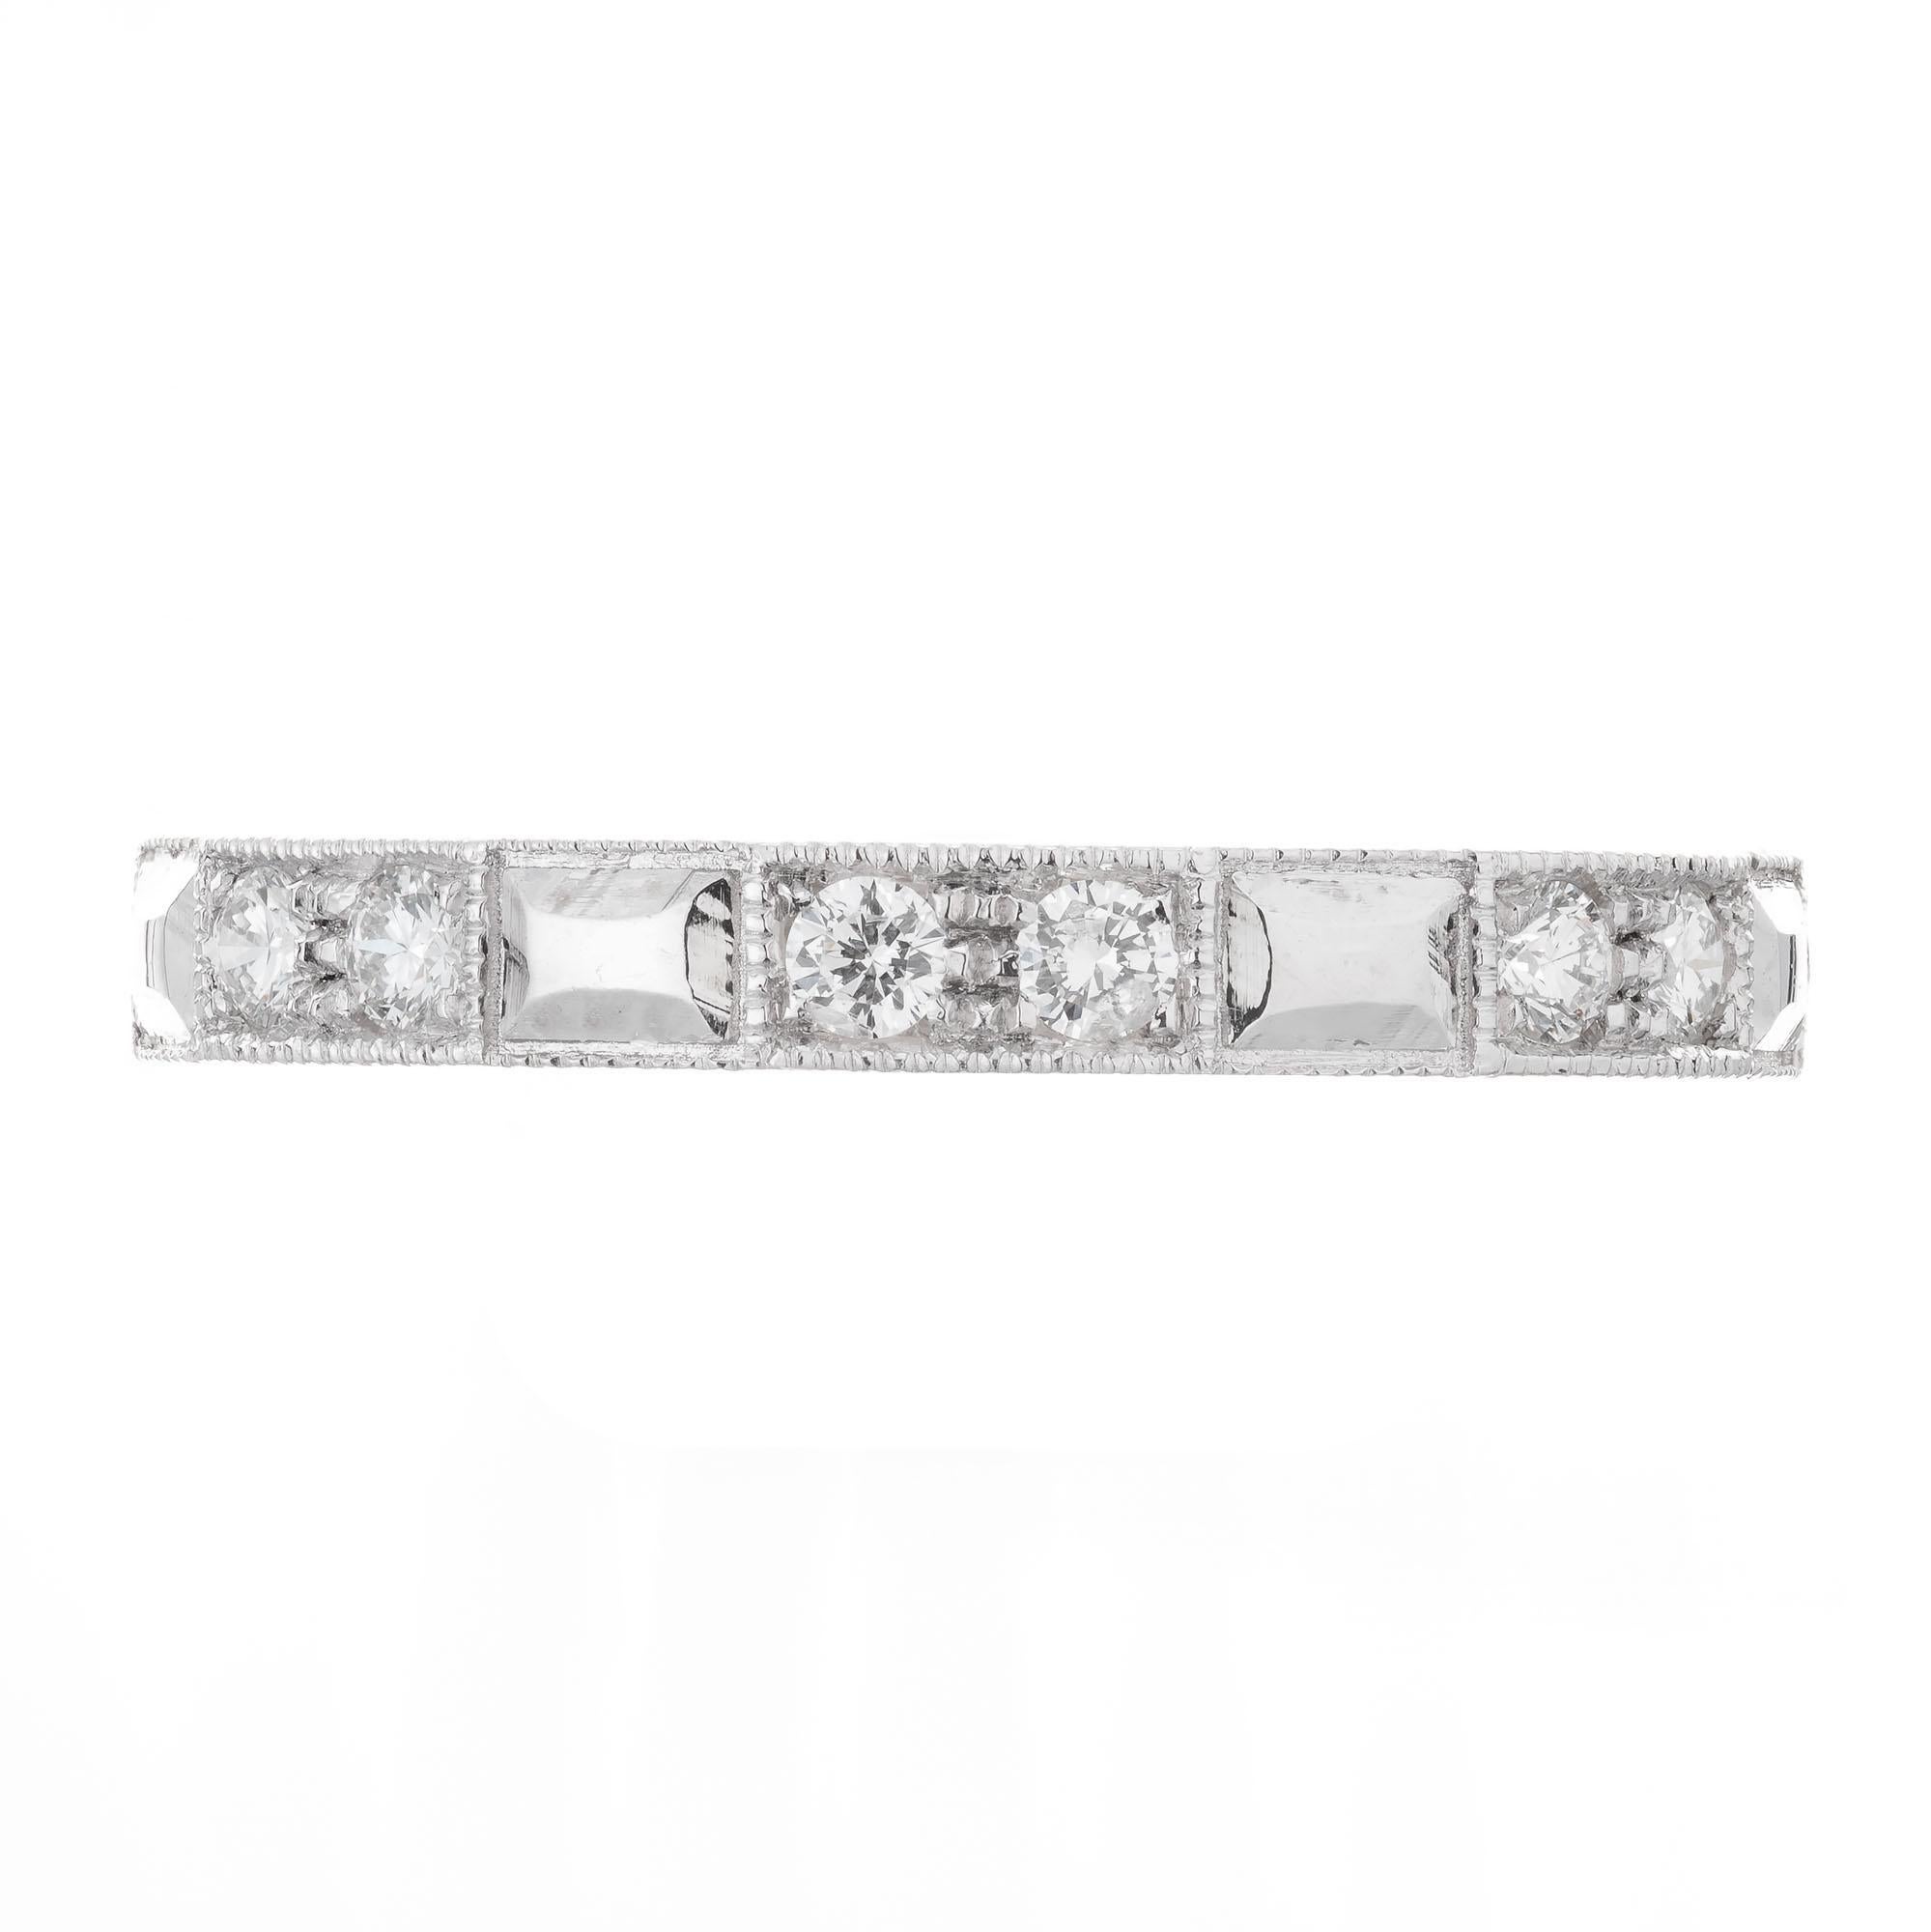 Peter Suchy custom-made diamond platinum antique inspired wedding band with alternating double round diamonds, pave sections separated by platinum rectangles. Created in the Peter Suchy Workshop

14 round ideal brilliant cut diamonds, F-G VS approx.